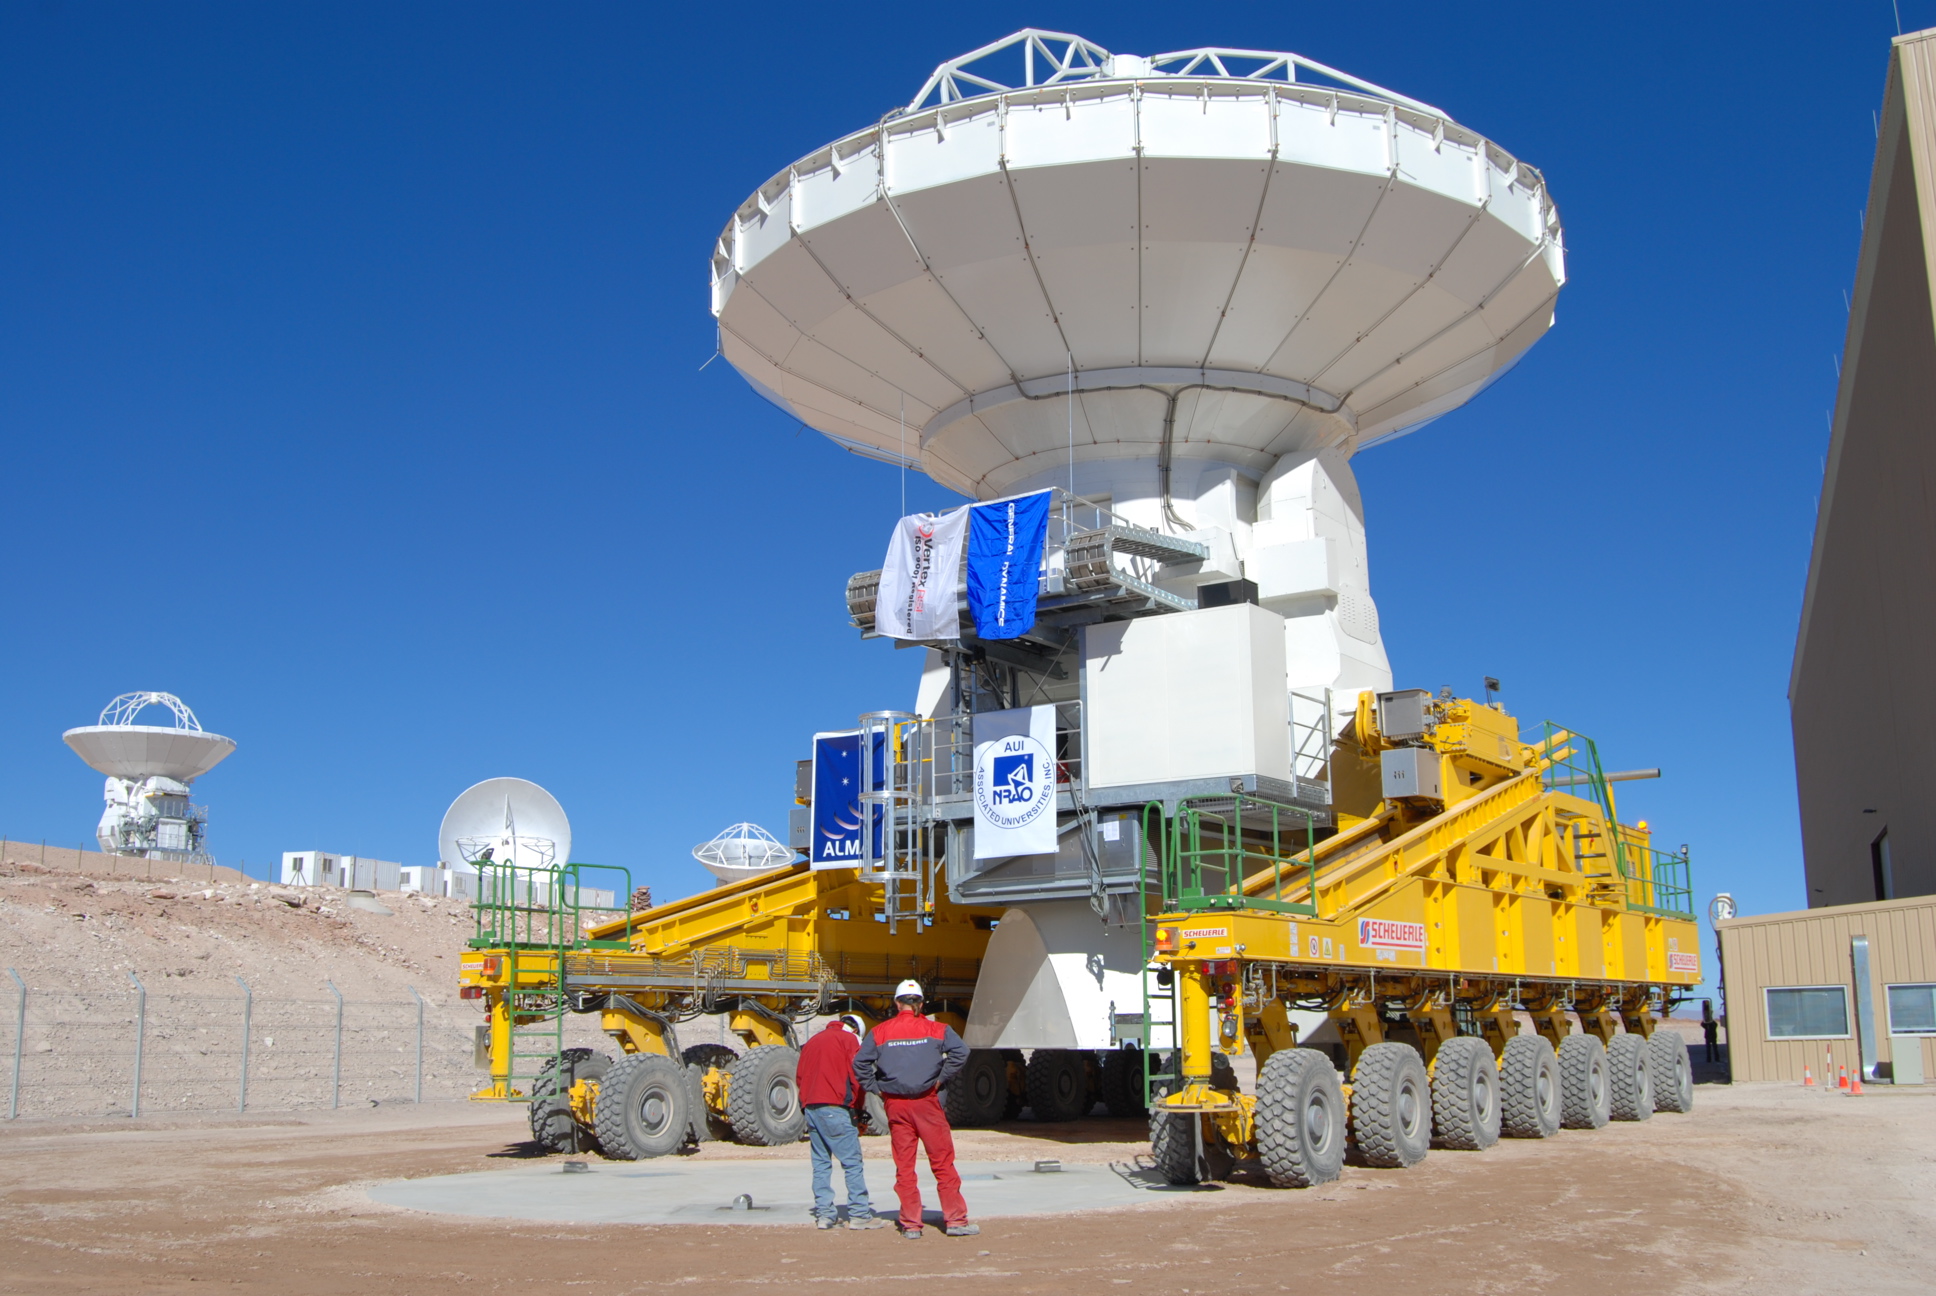 VertexRSI2 moved from SEF Assembly Building to an SEF antenna station by ALMA Transporter